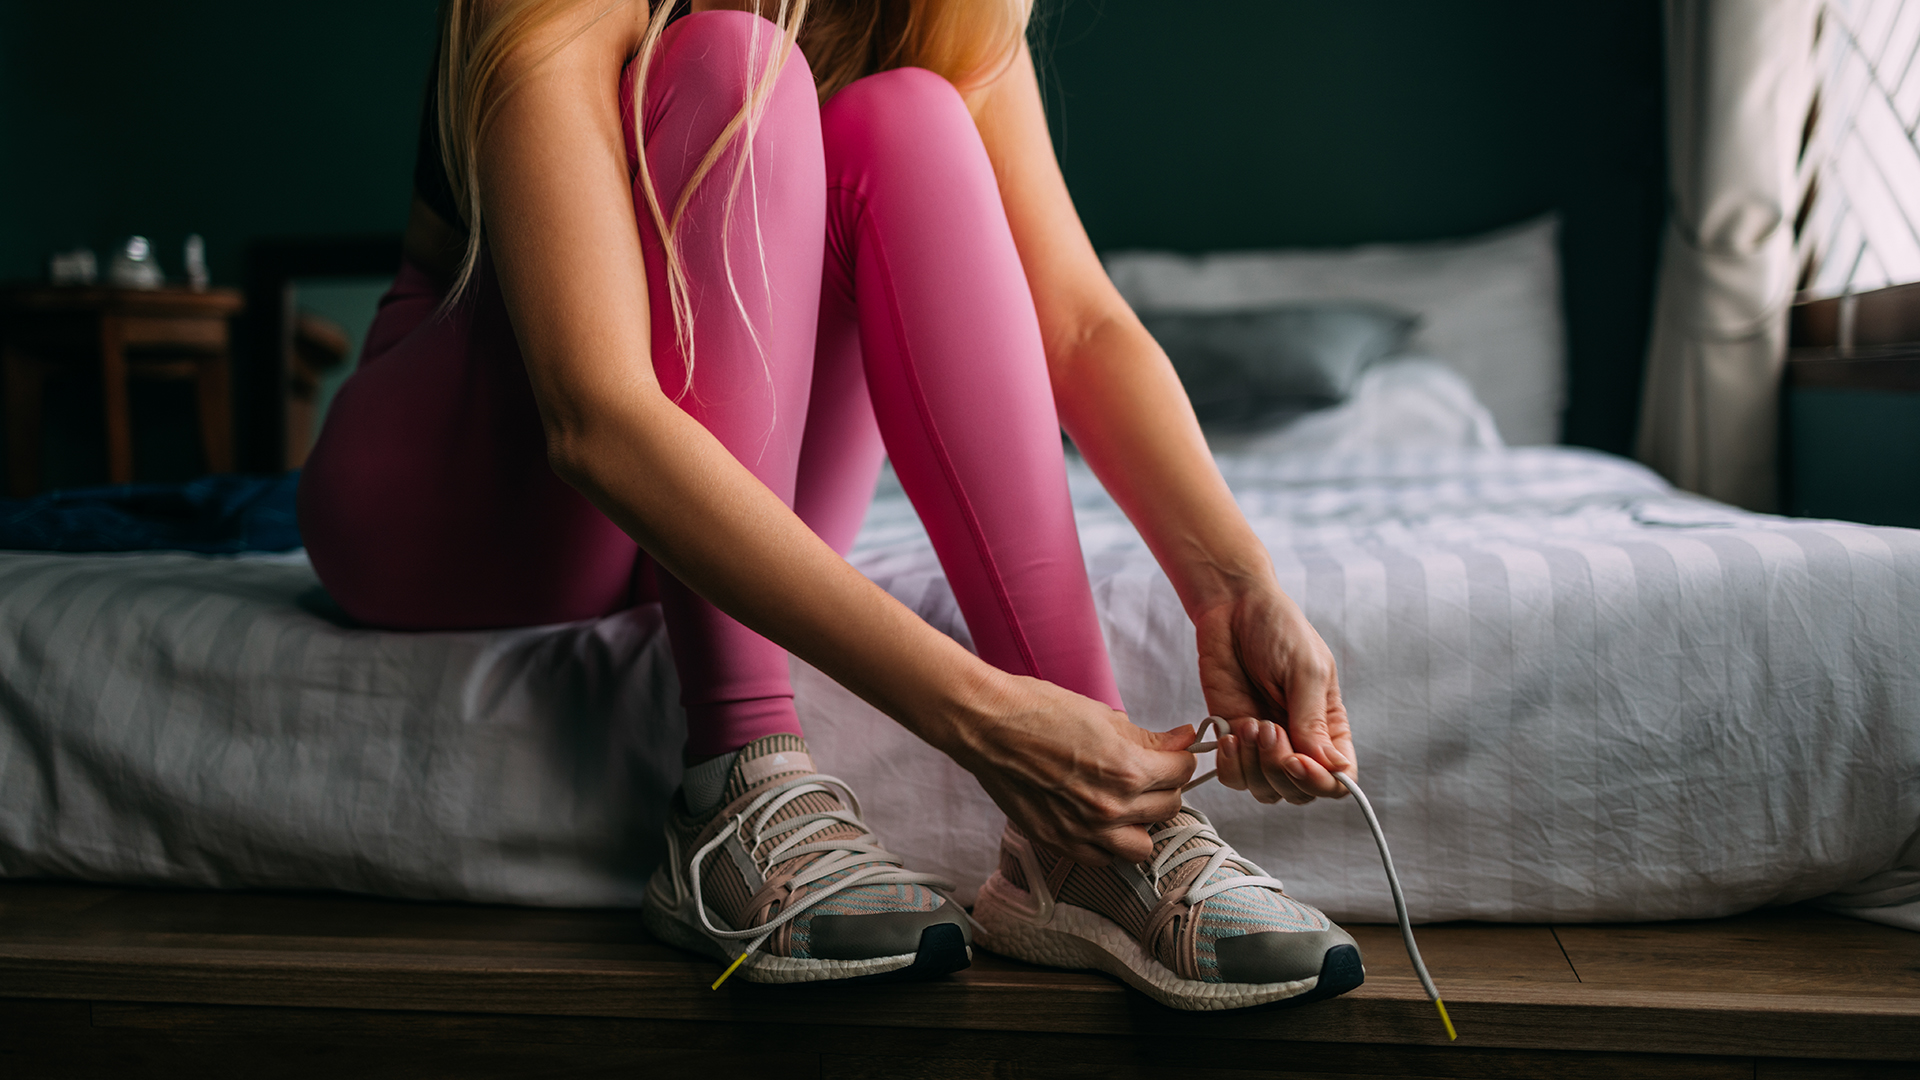 A woman sits on the corner of her bed wearing workout clothes and tying the laces on her running shoes